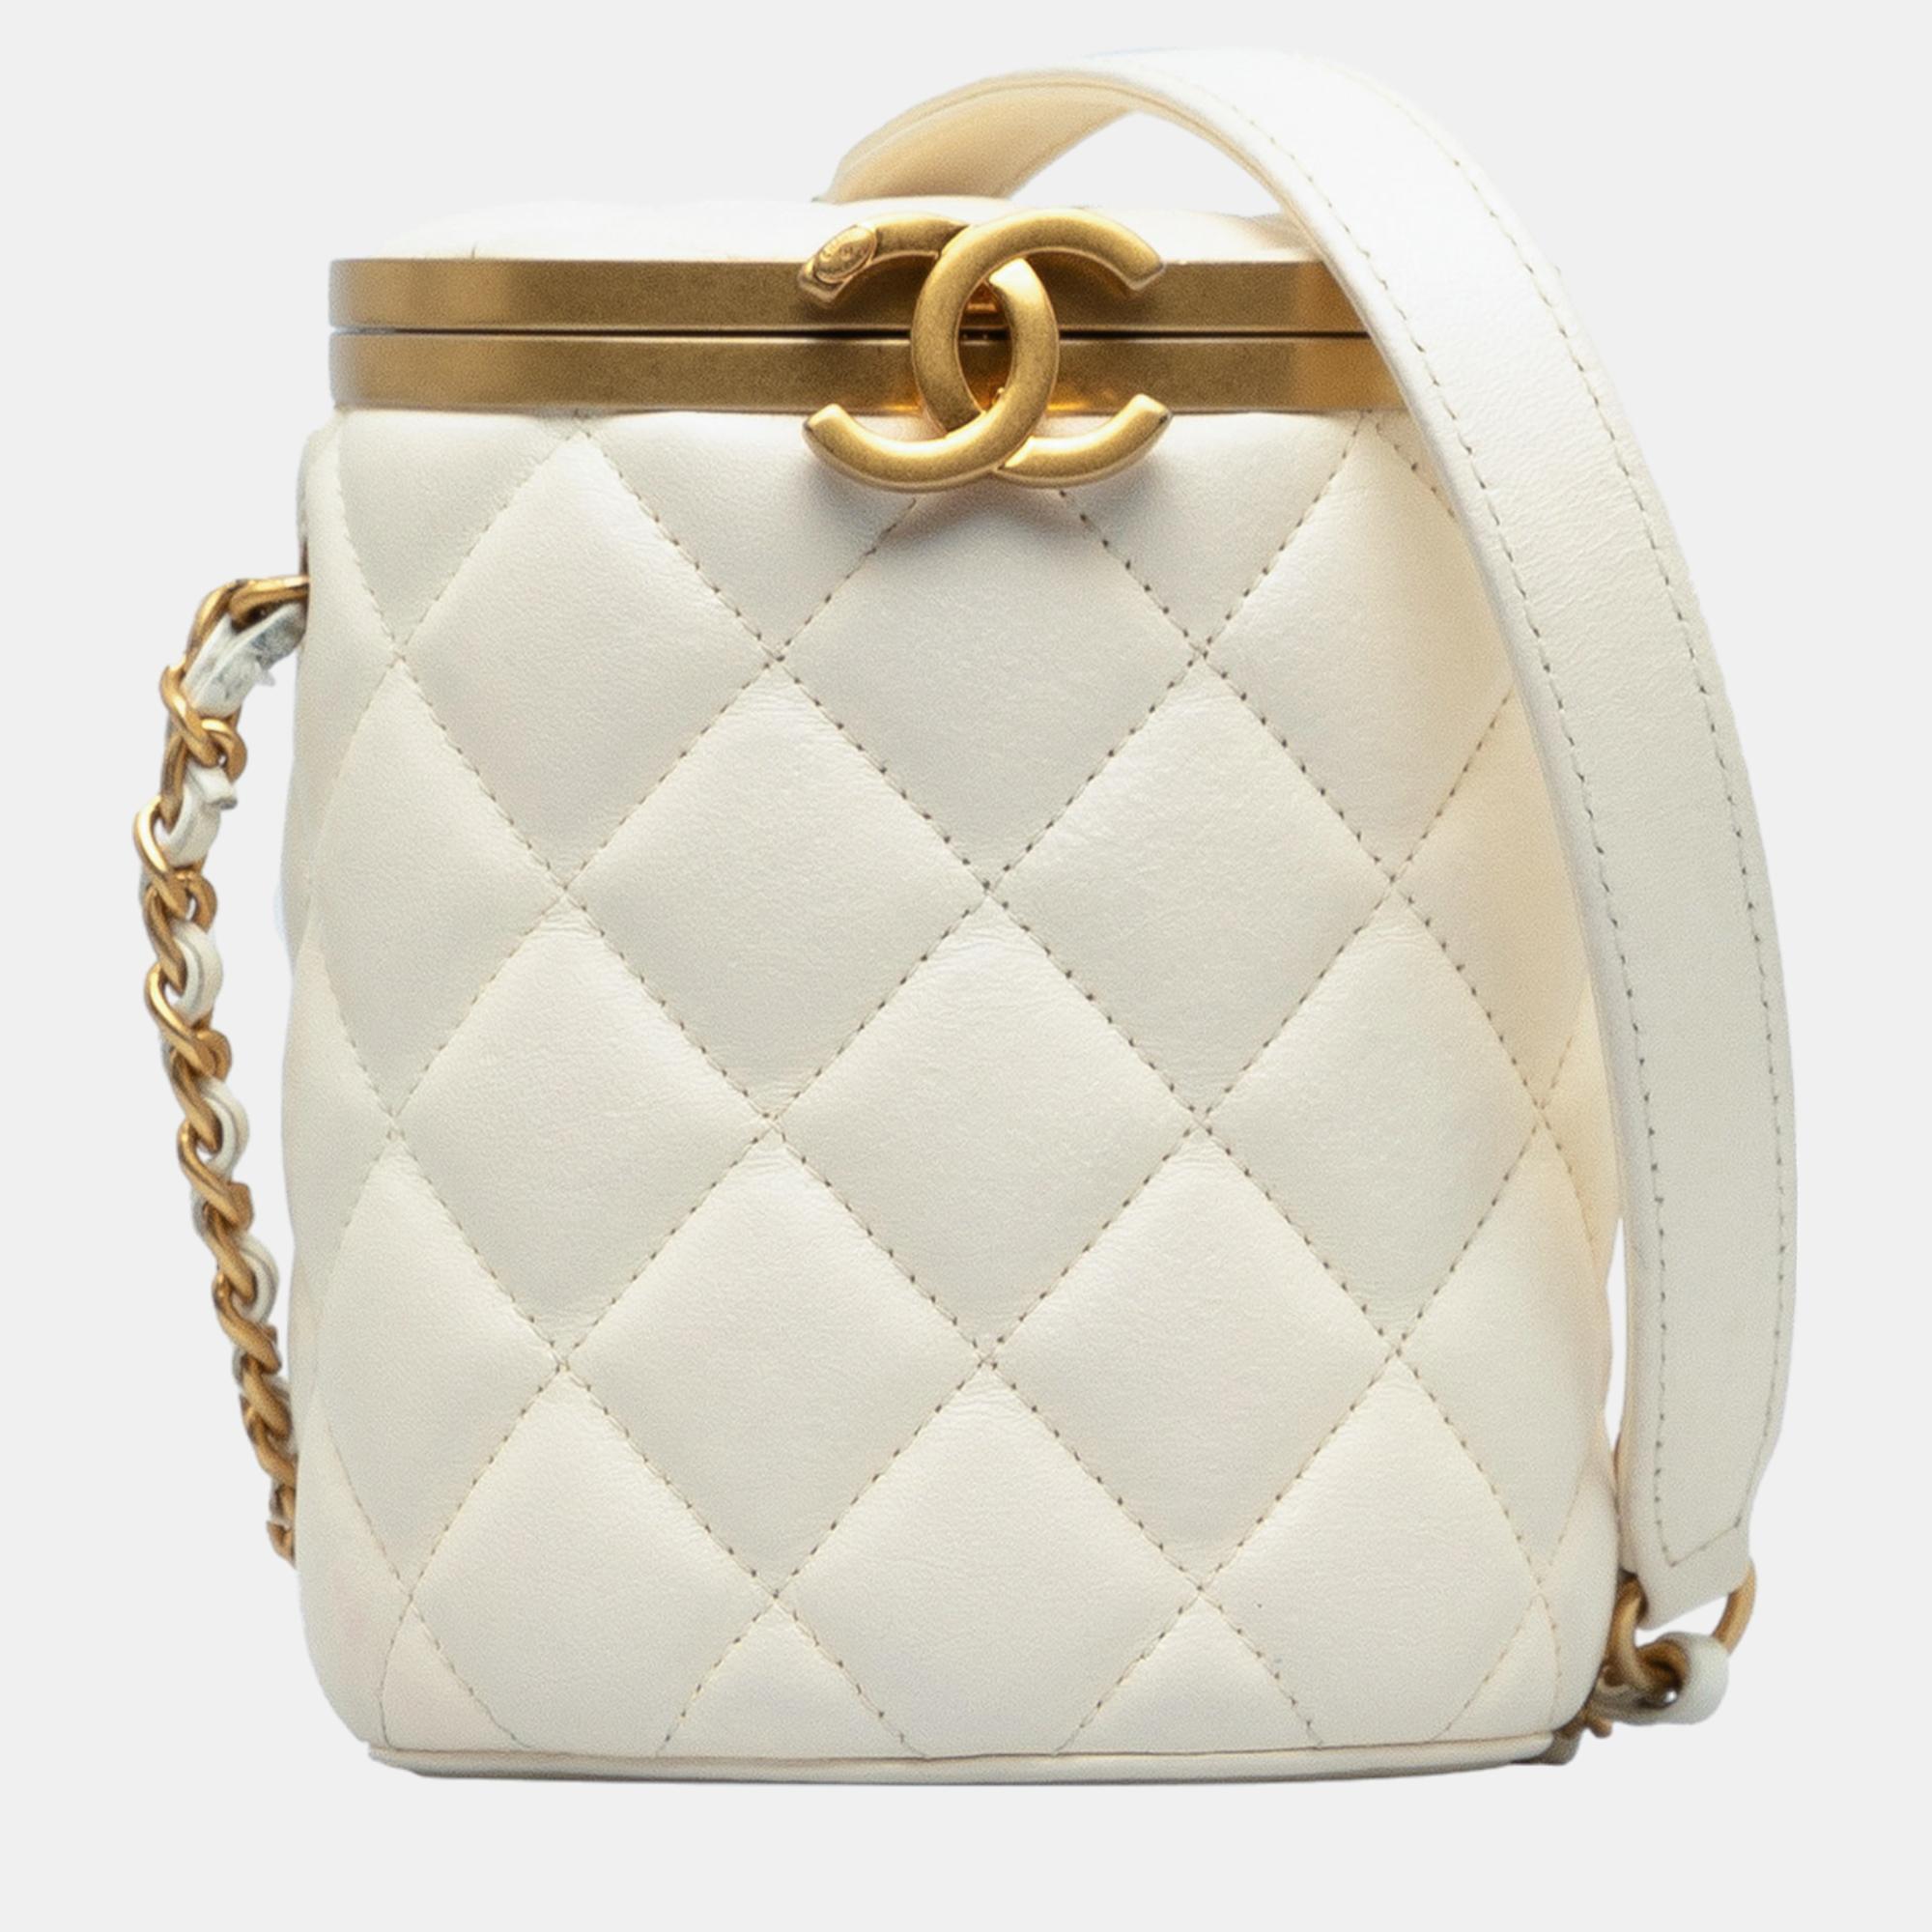 Chanel white small quilted lambskin crown box bag